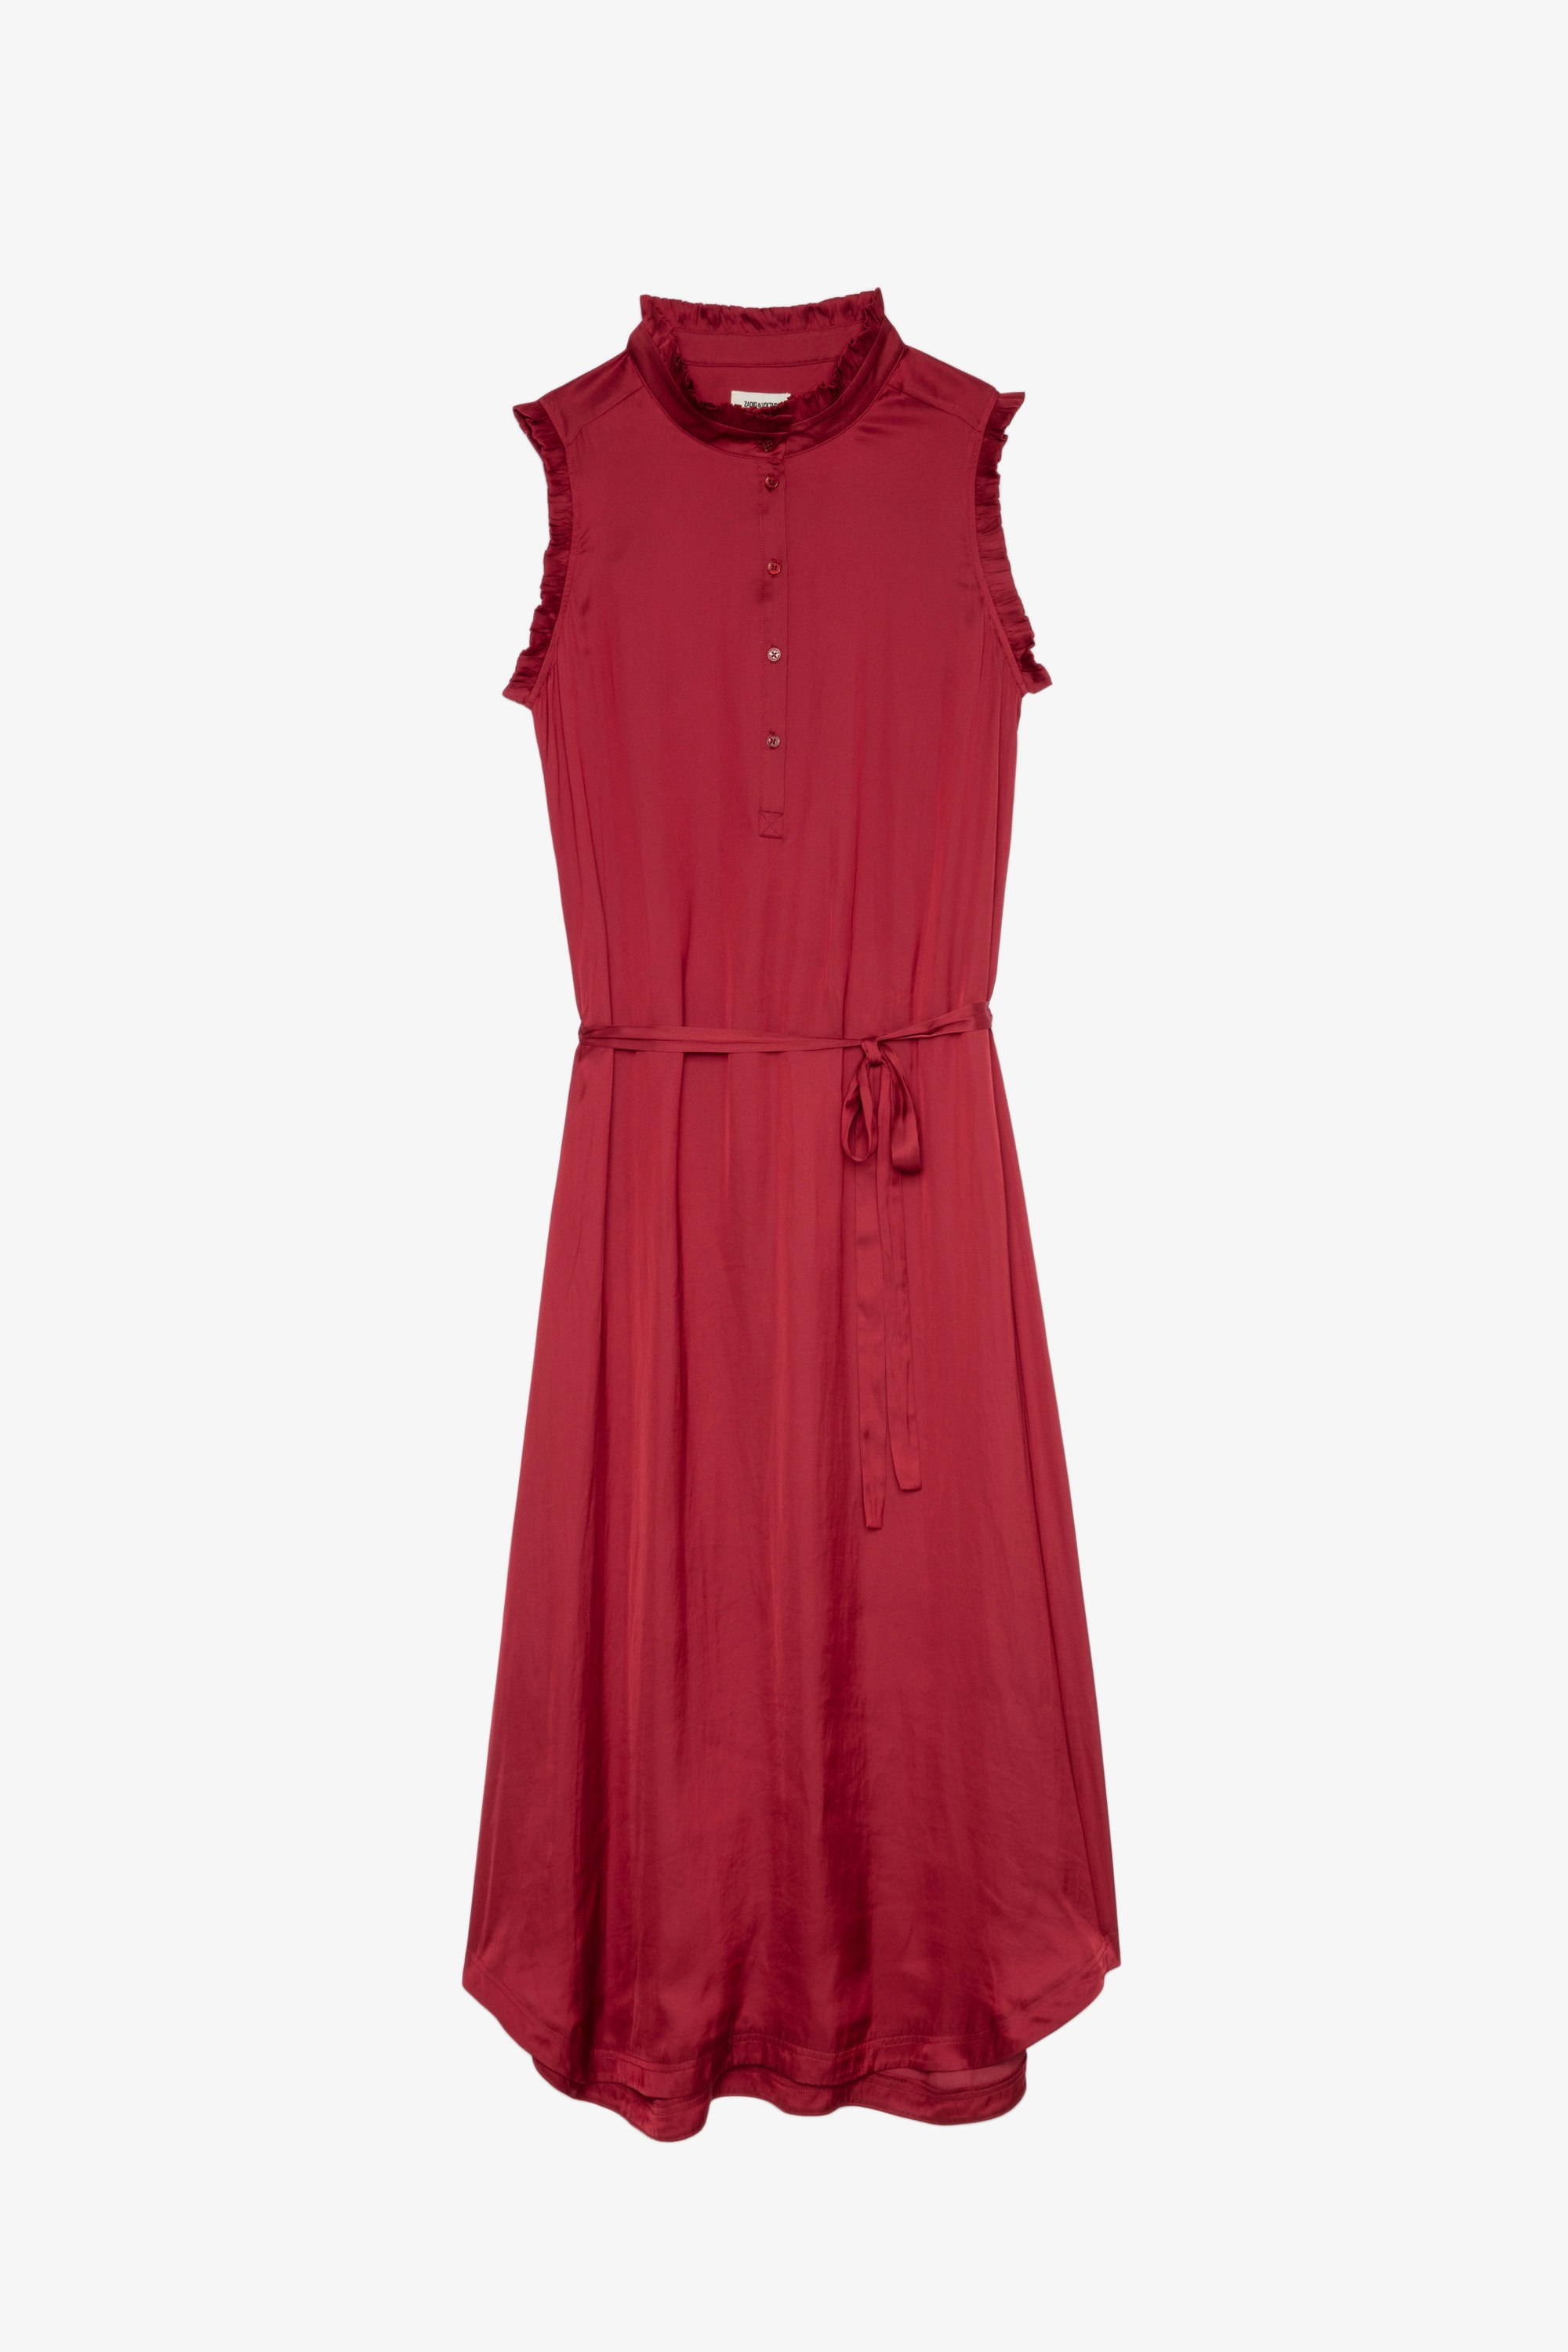 Raos ワンピース Women’s satin dress with ruffle detailing and belted at the waist
